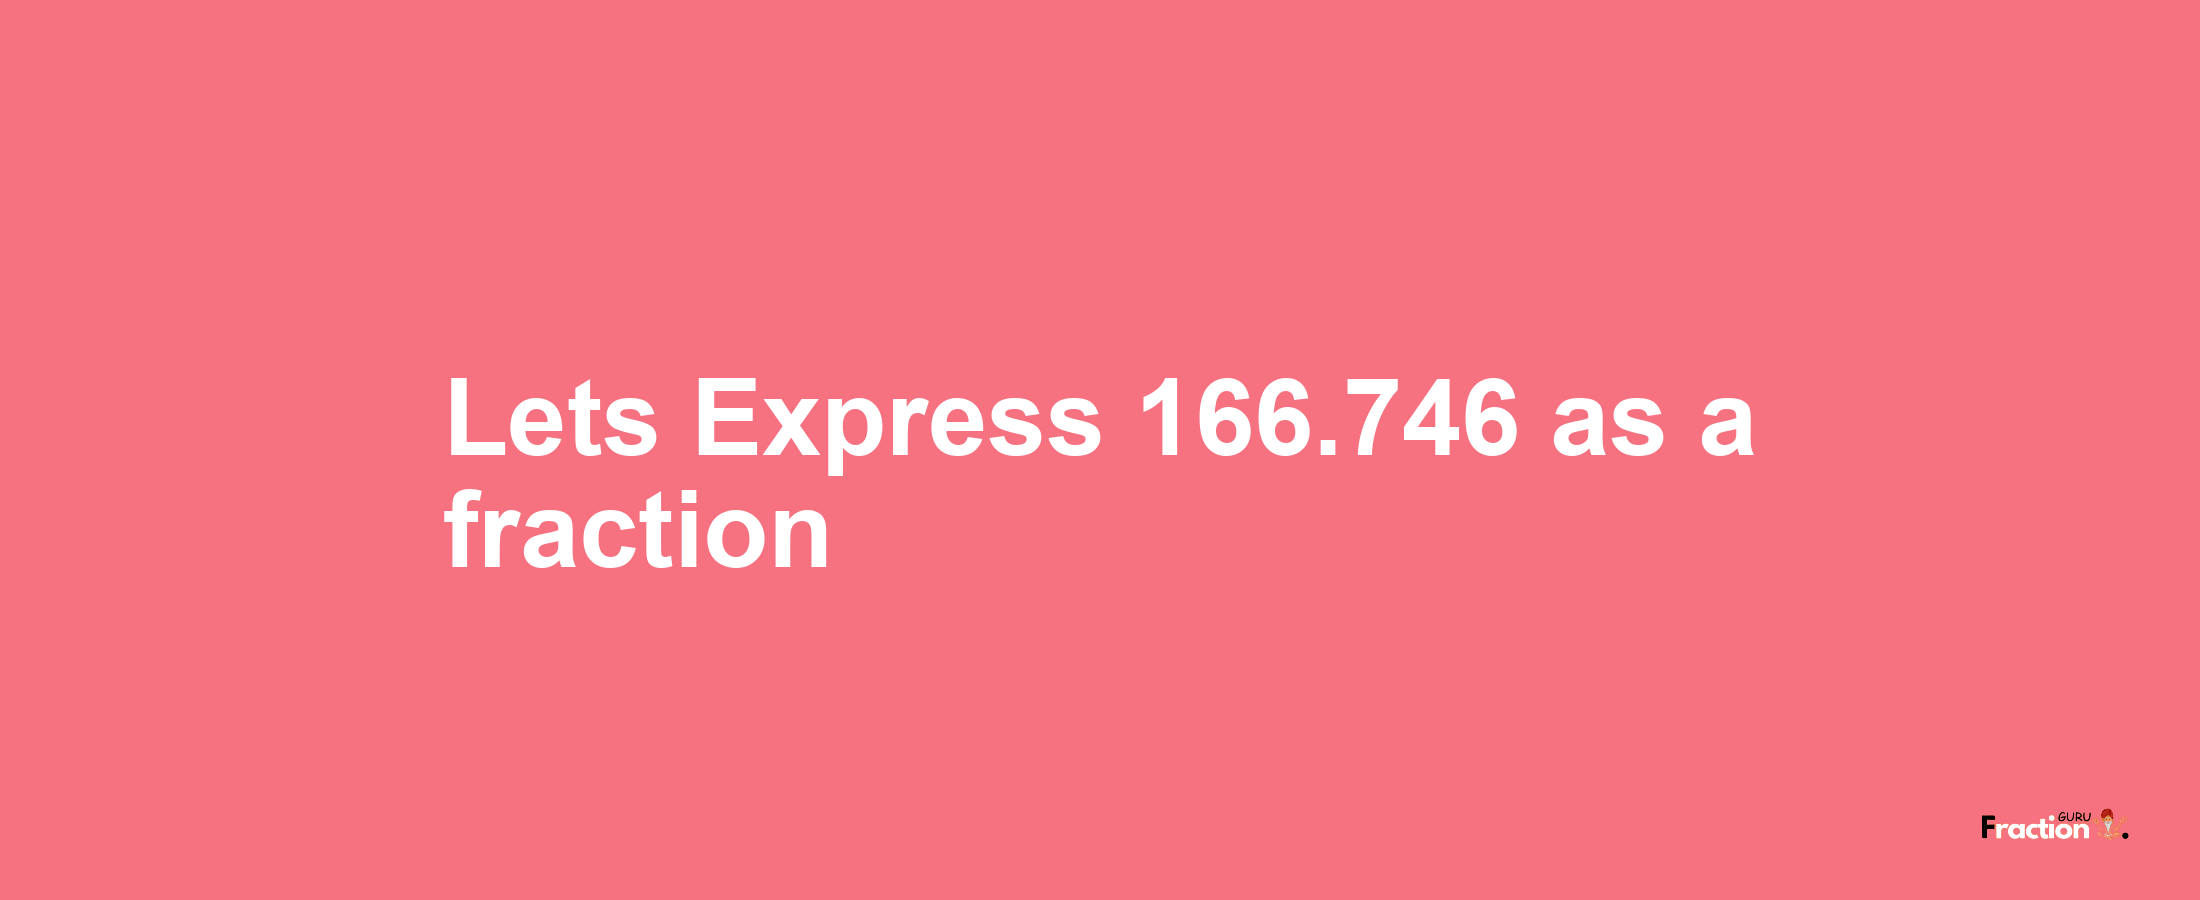 Lets Express 166.746 as afraction